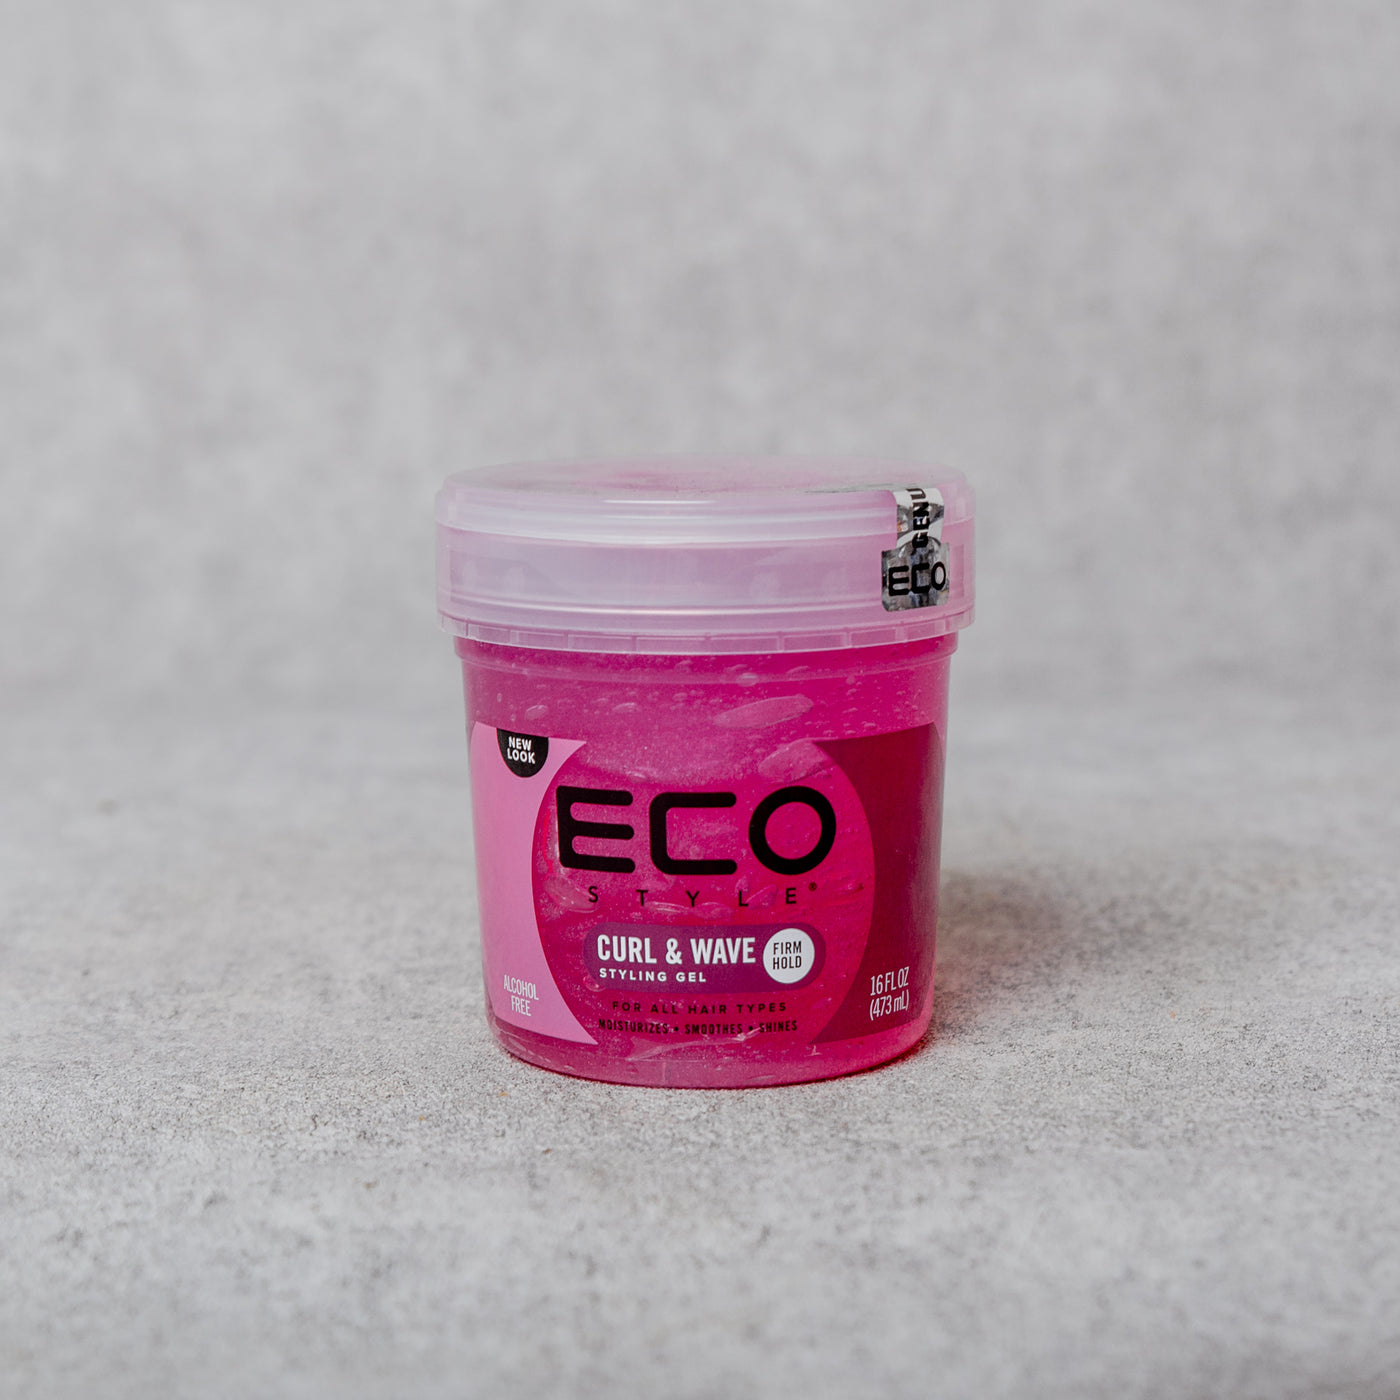 Eco - Curl & Wave Styling Gel